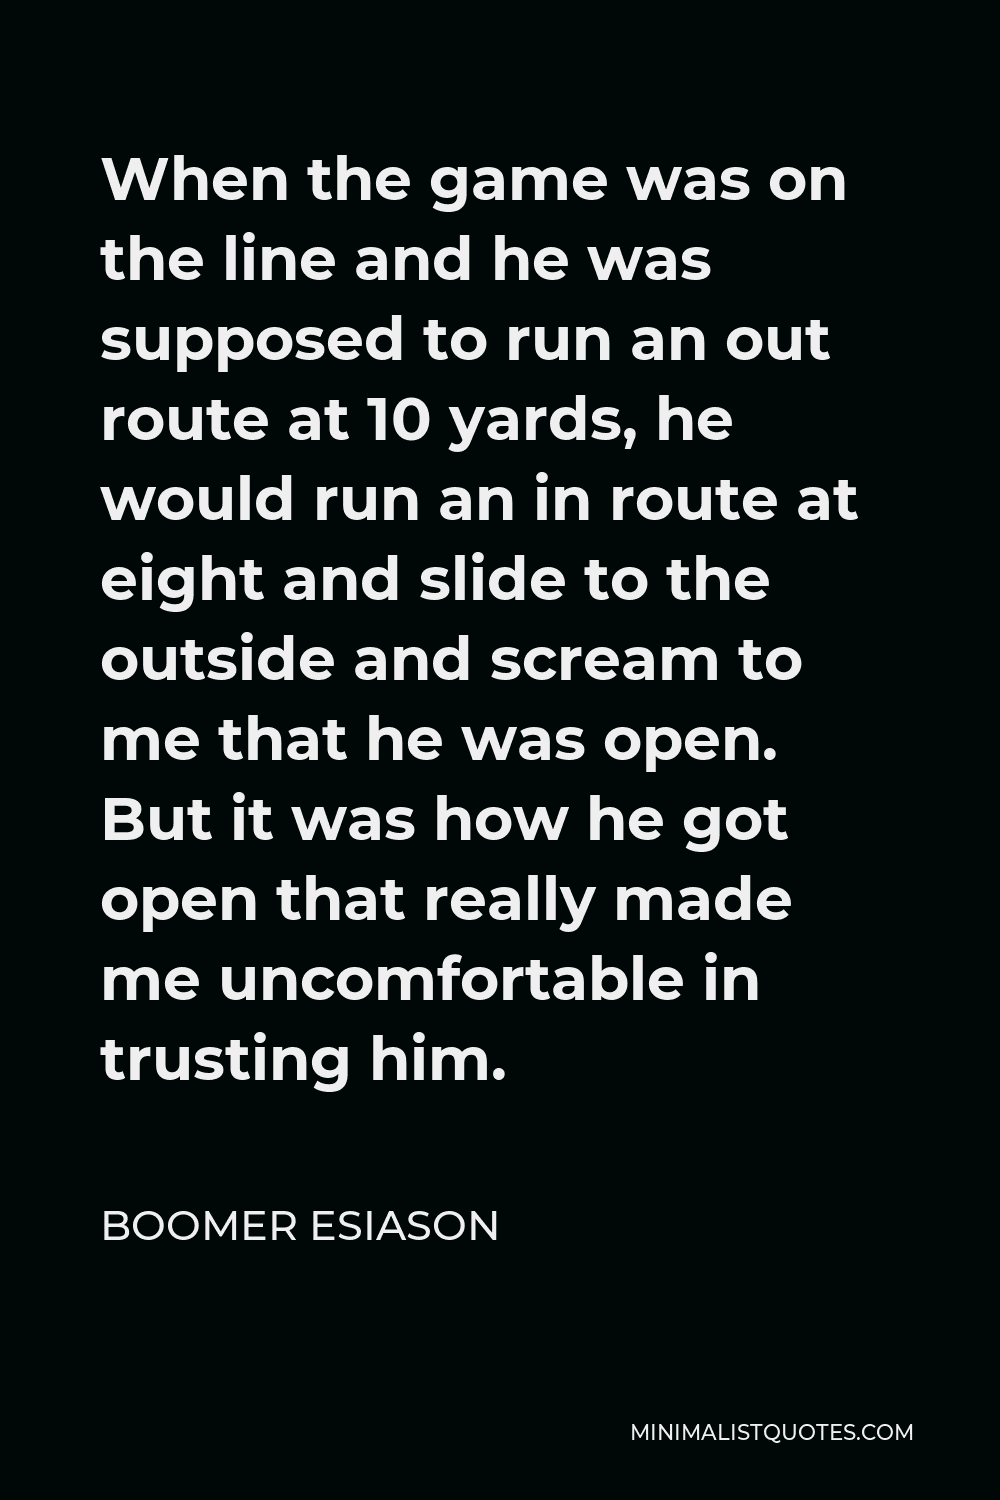 Boomer Esiason Quote - When the game was on the line and he was supposed to run an out route at 10 yards, he would run an in route at eight and slide to the outside and scream to me that he was open. But it was how he got open that really made me uncomfortable in trusting him.